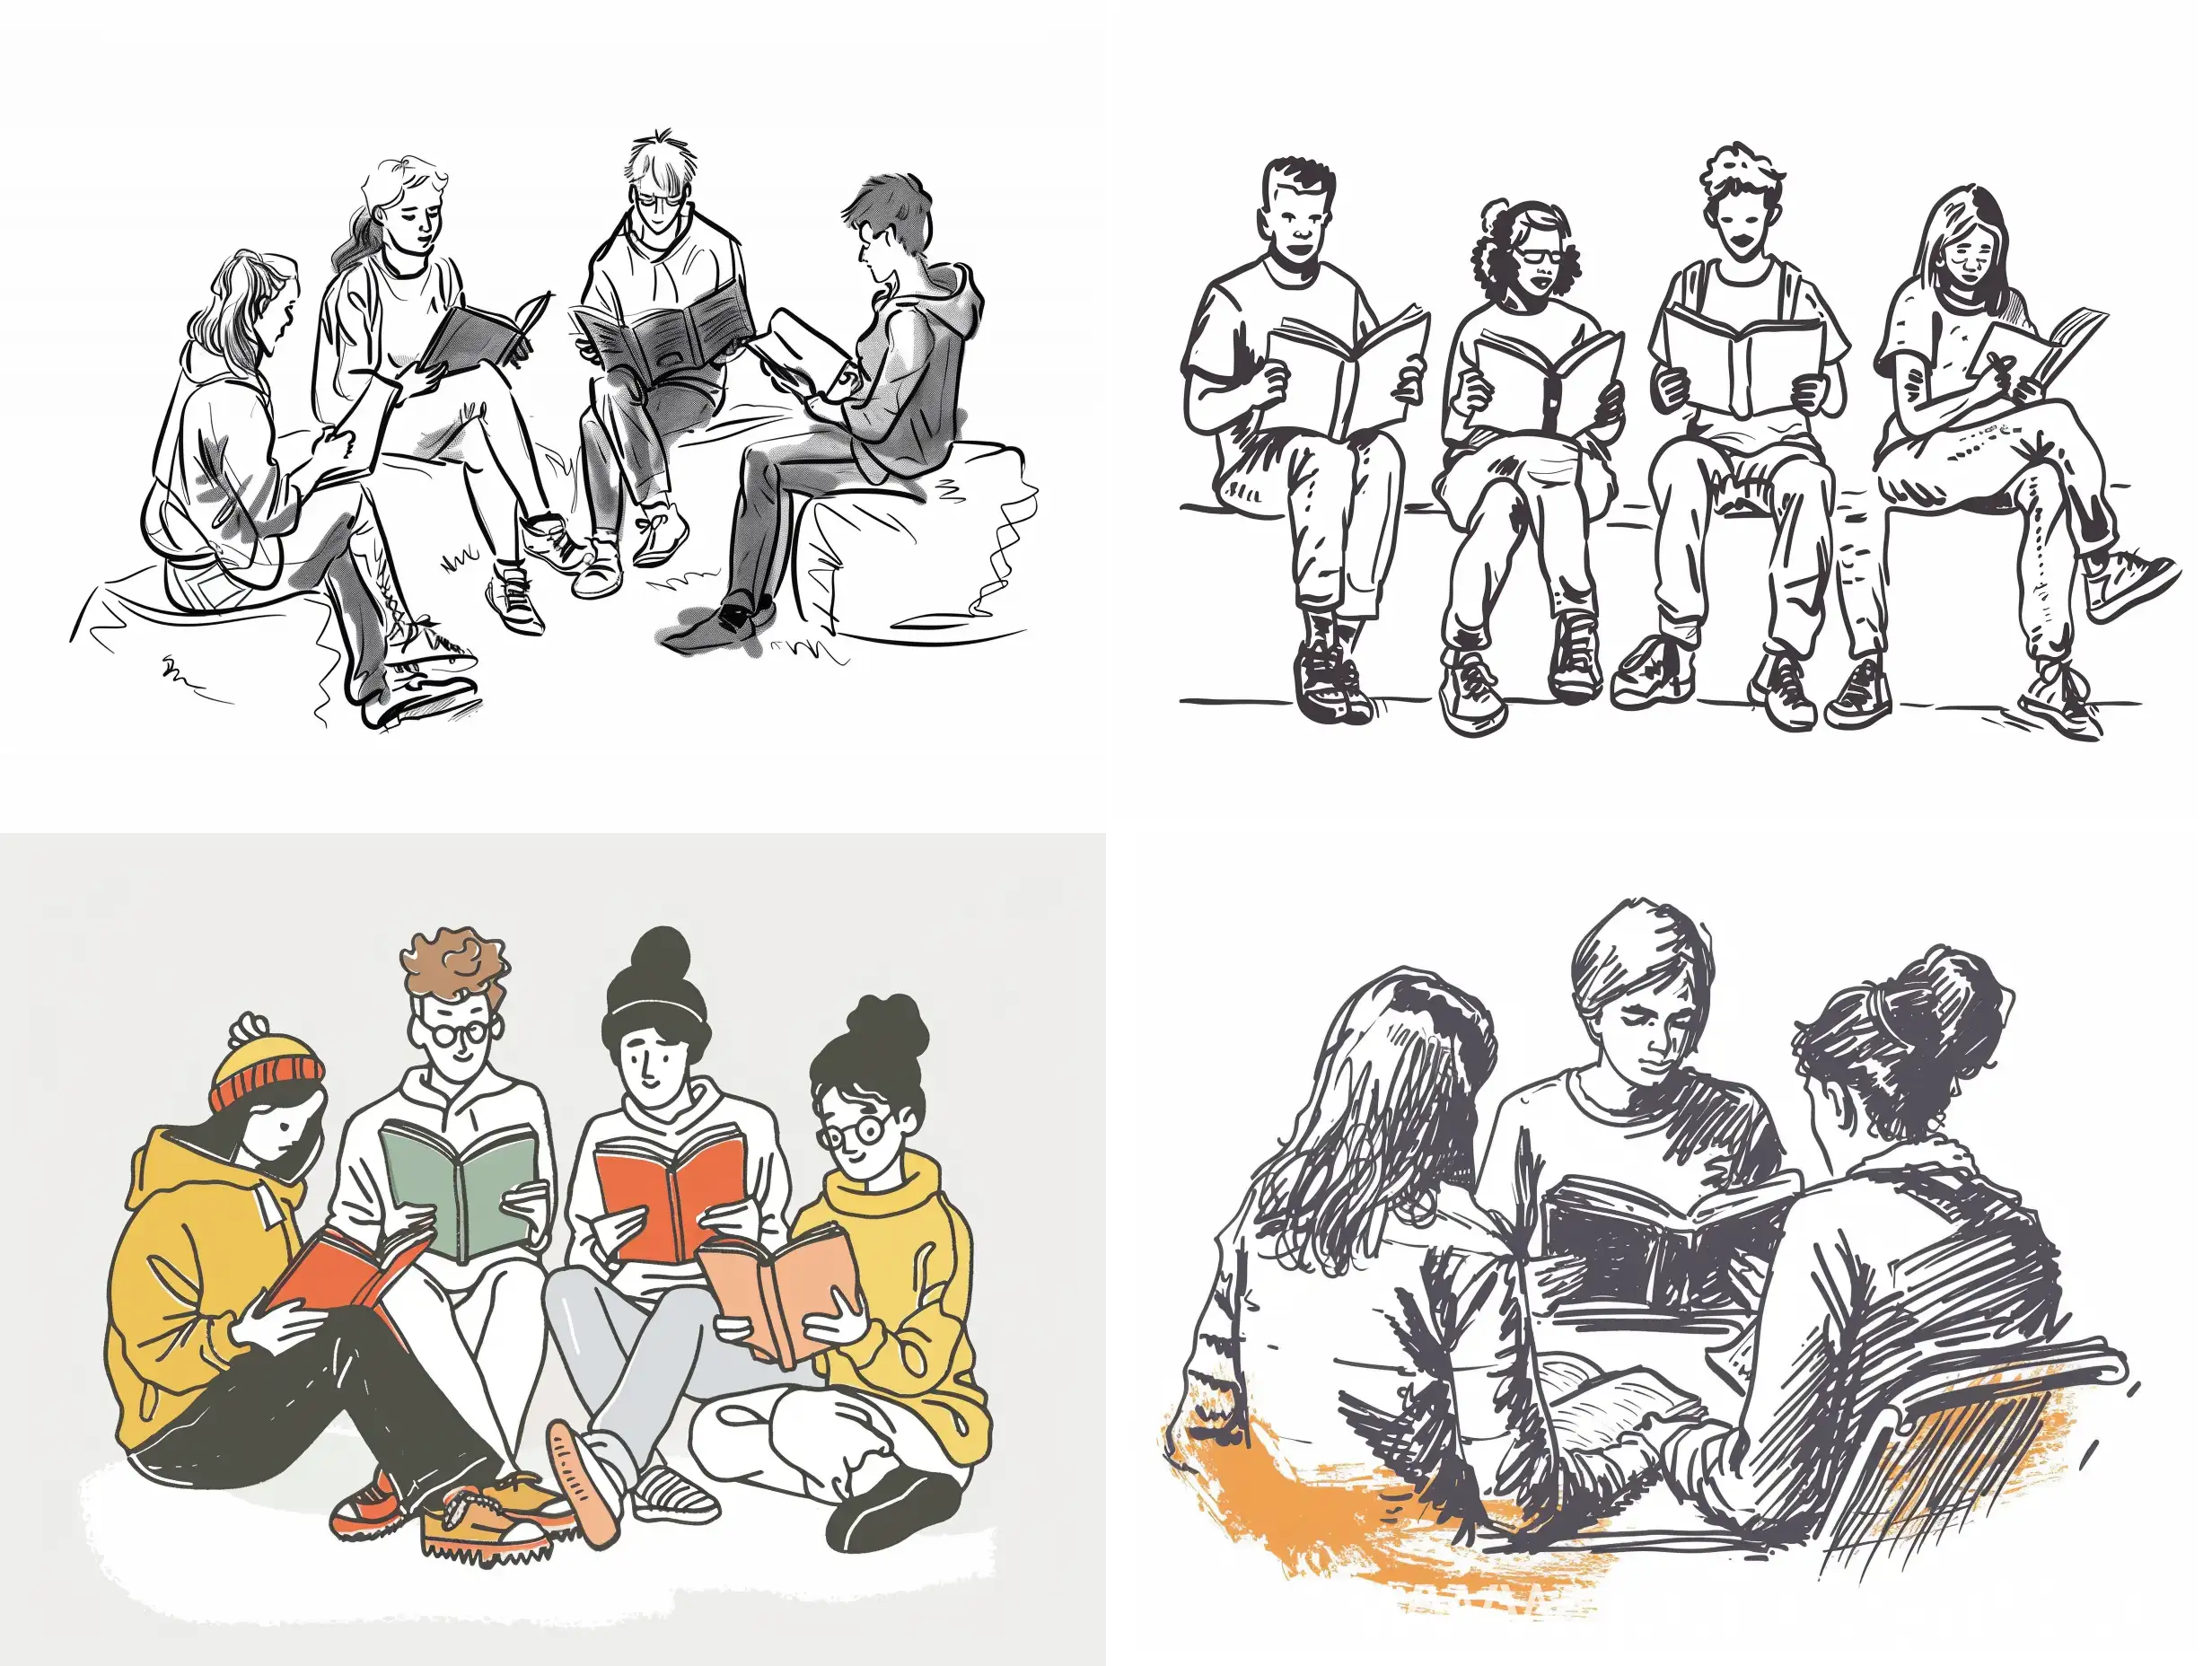 Harmonious-Gathering-Diverse-Group-Reading-Books-Together